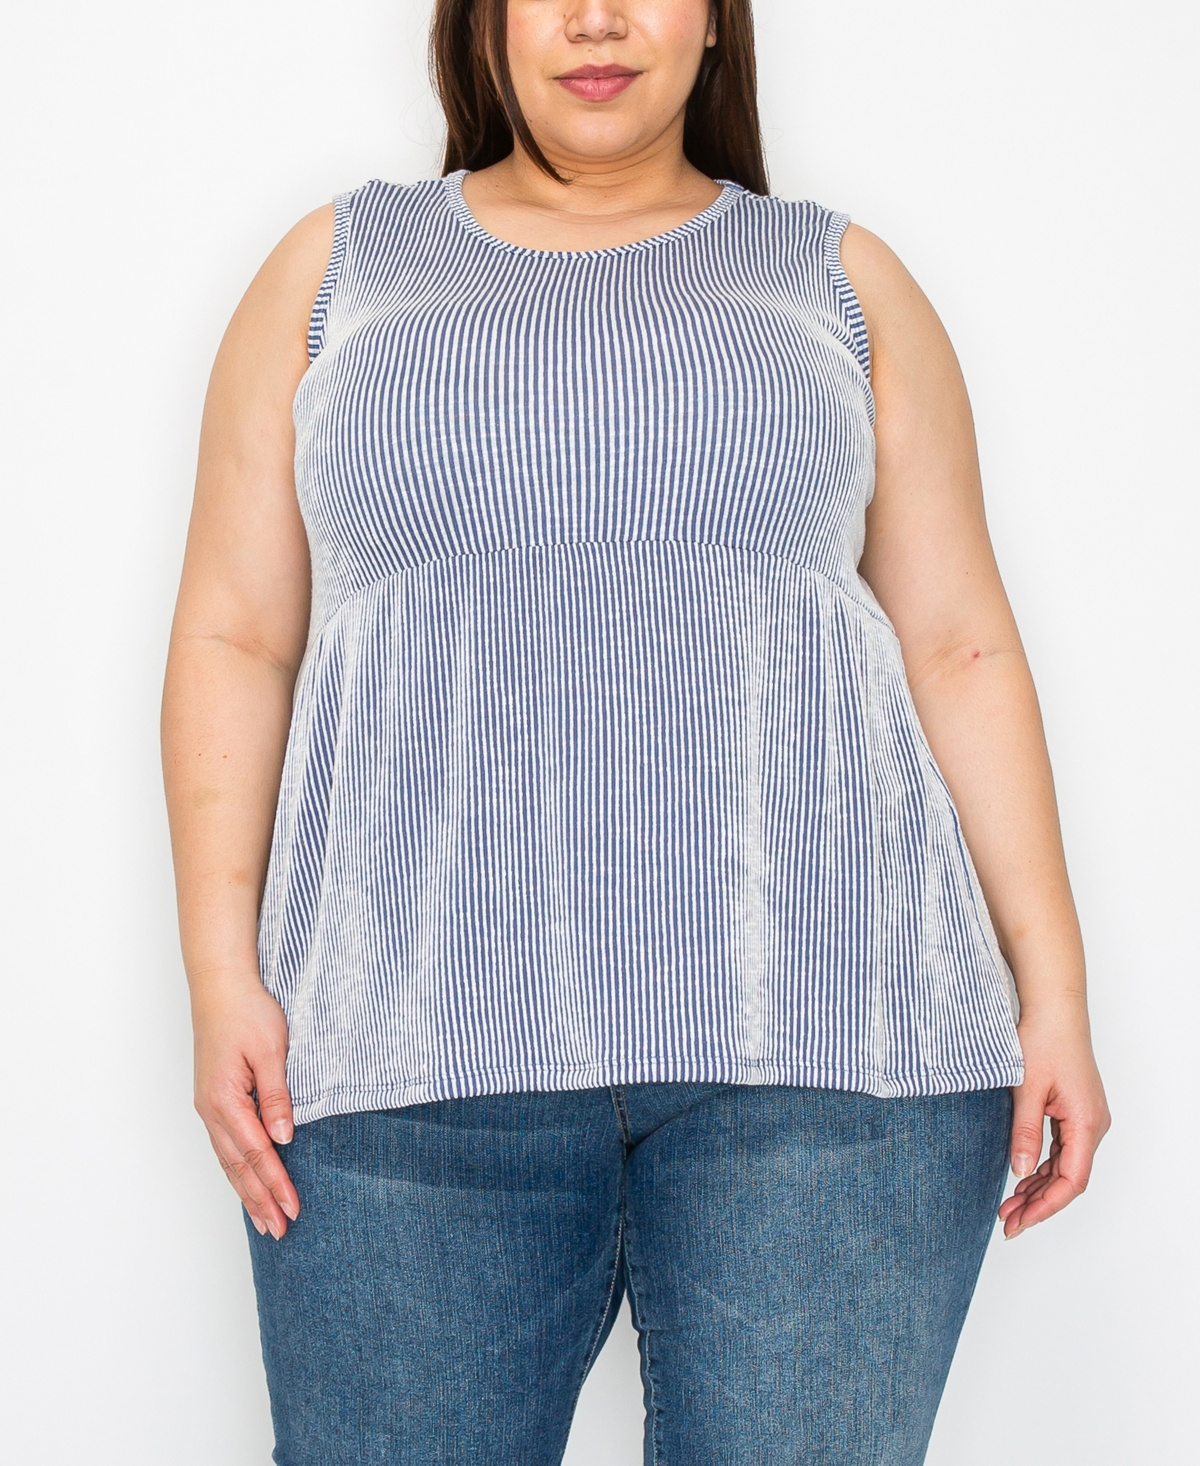 Shop Coin 1804 Plus Size Span Rail Textured Stripe Baby Doll Tank Top In Denim Ivory